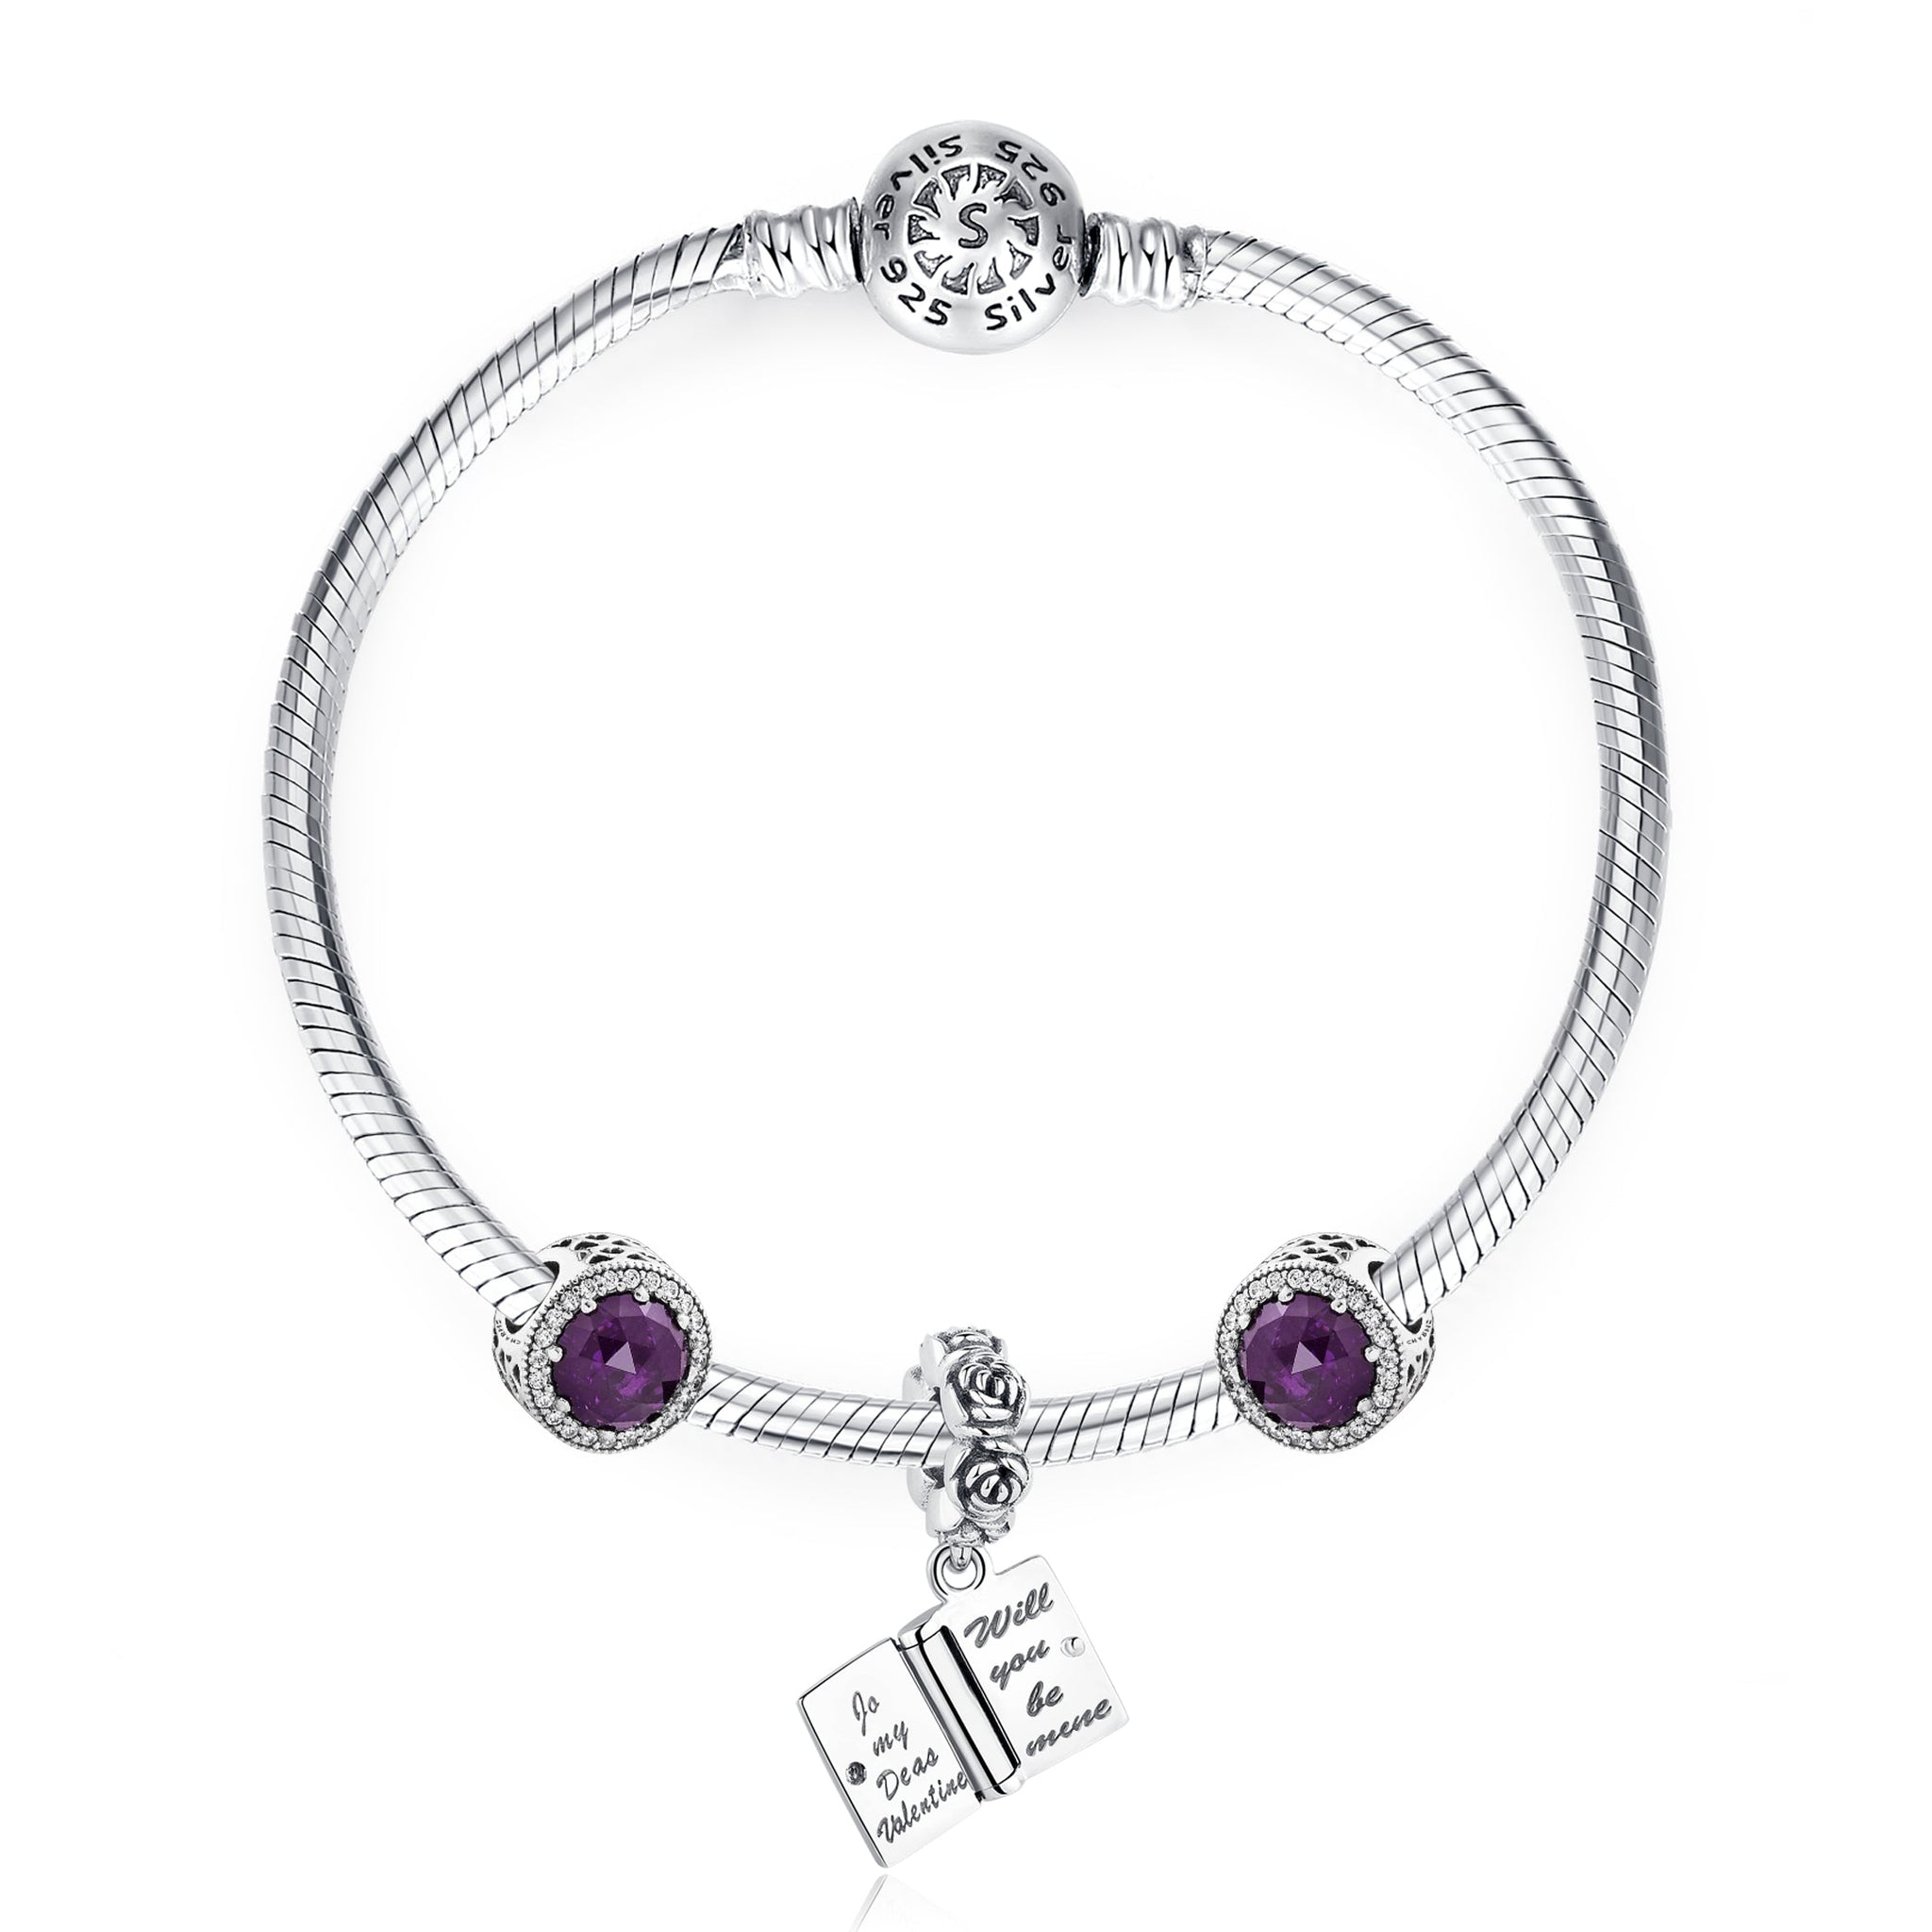 Jewdii 925 Sterling Silver Bracelet With Royal Purple Beads and Crystals Set